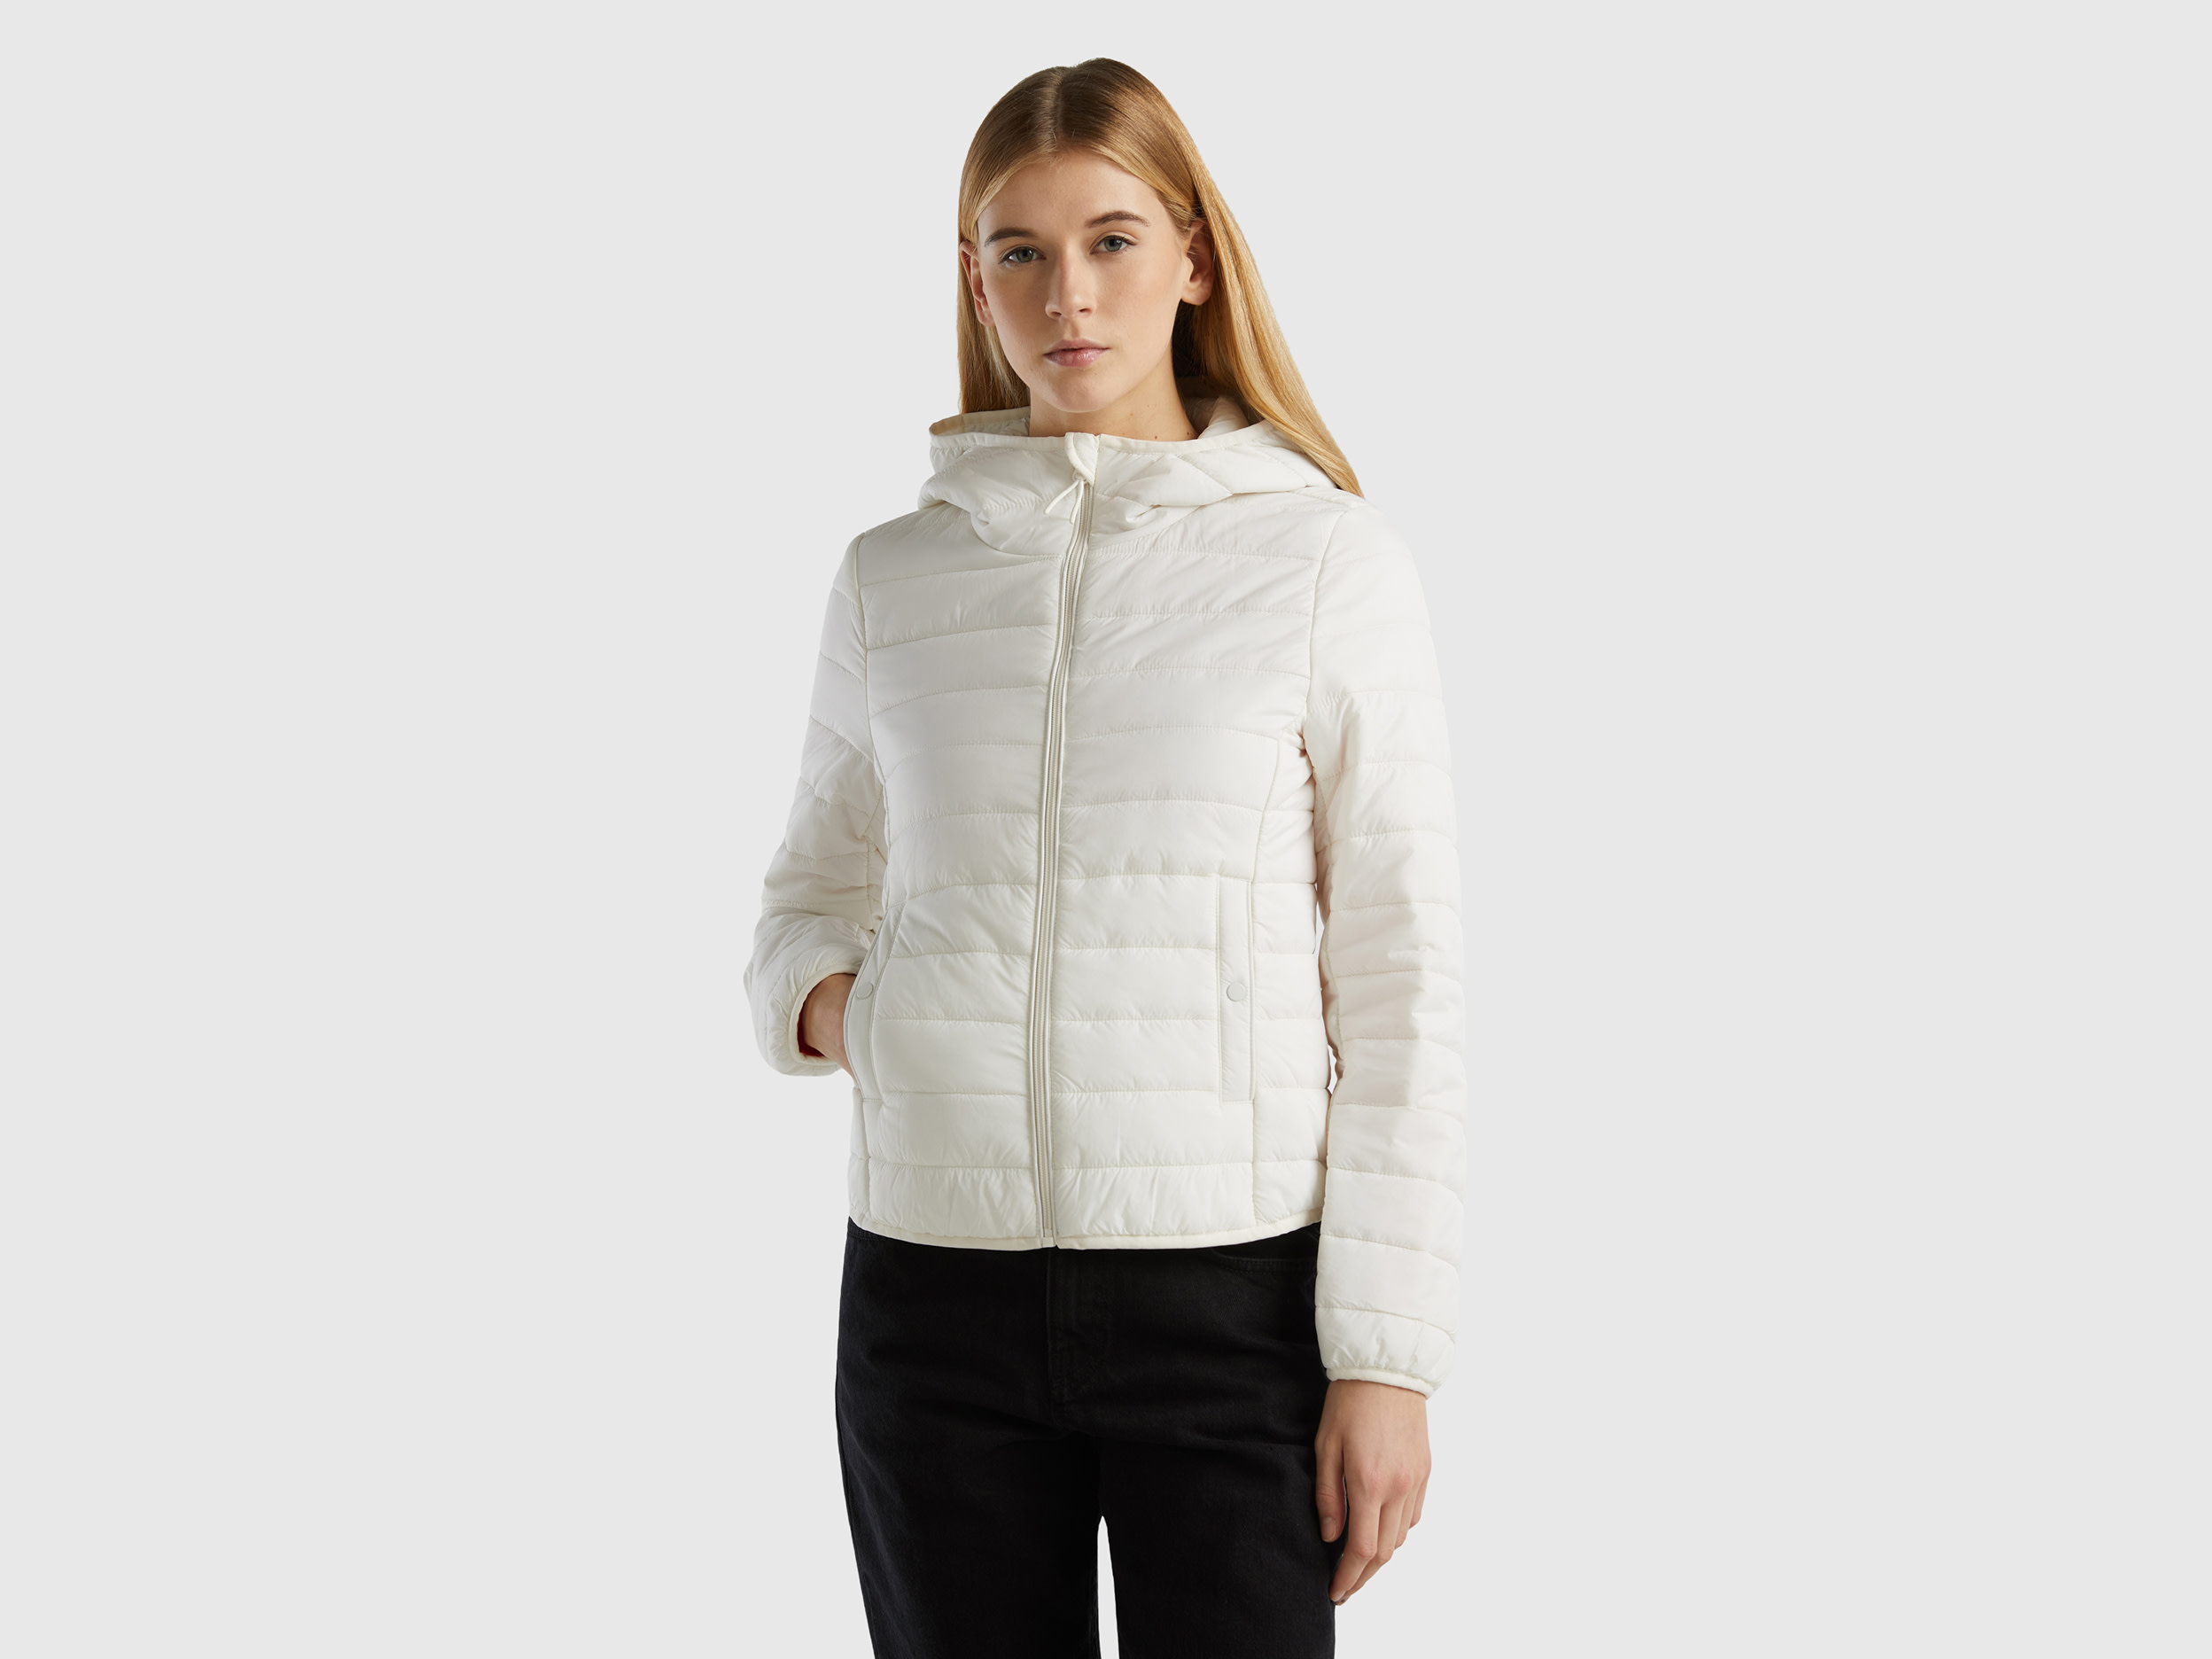 Benetton, Puffer Jacket With Recycled Wadding, size L, Creamy White, Women